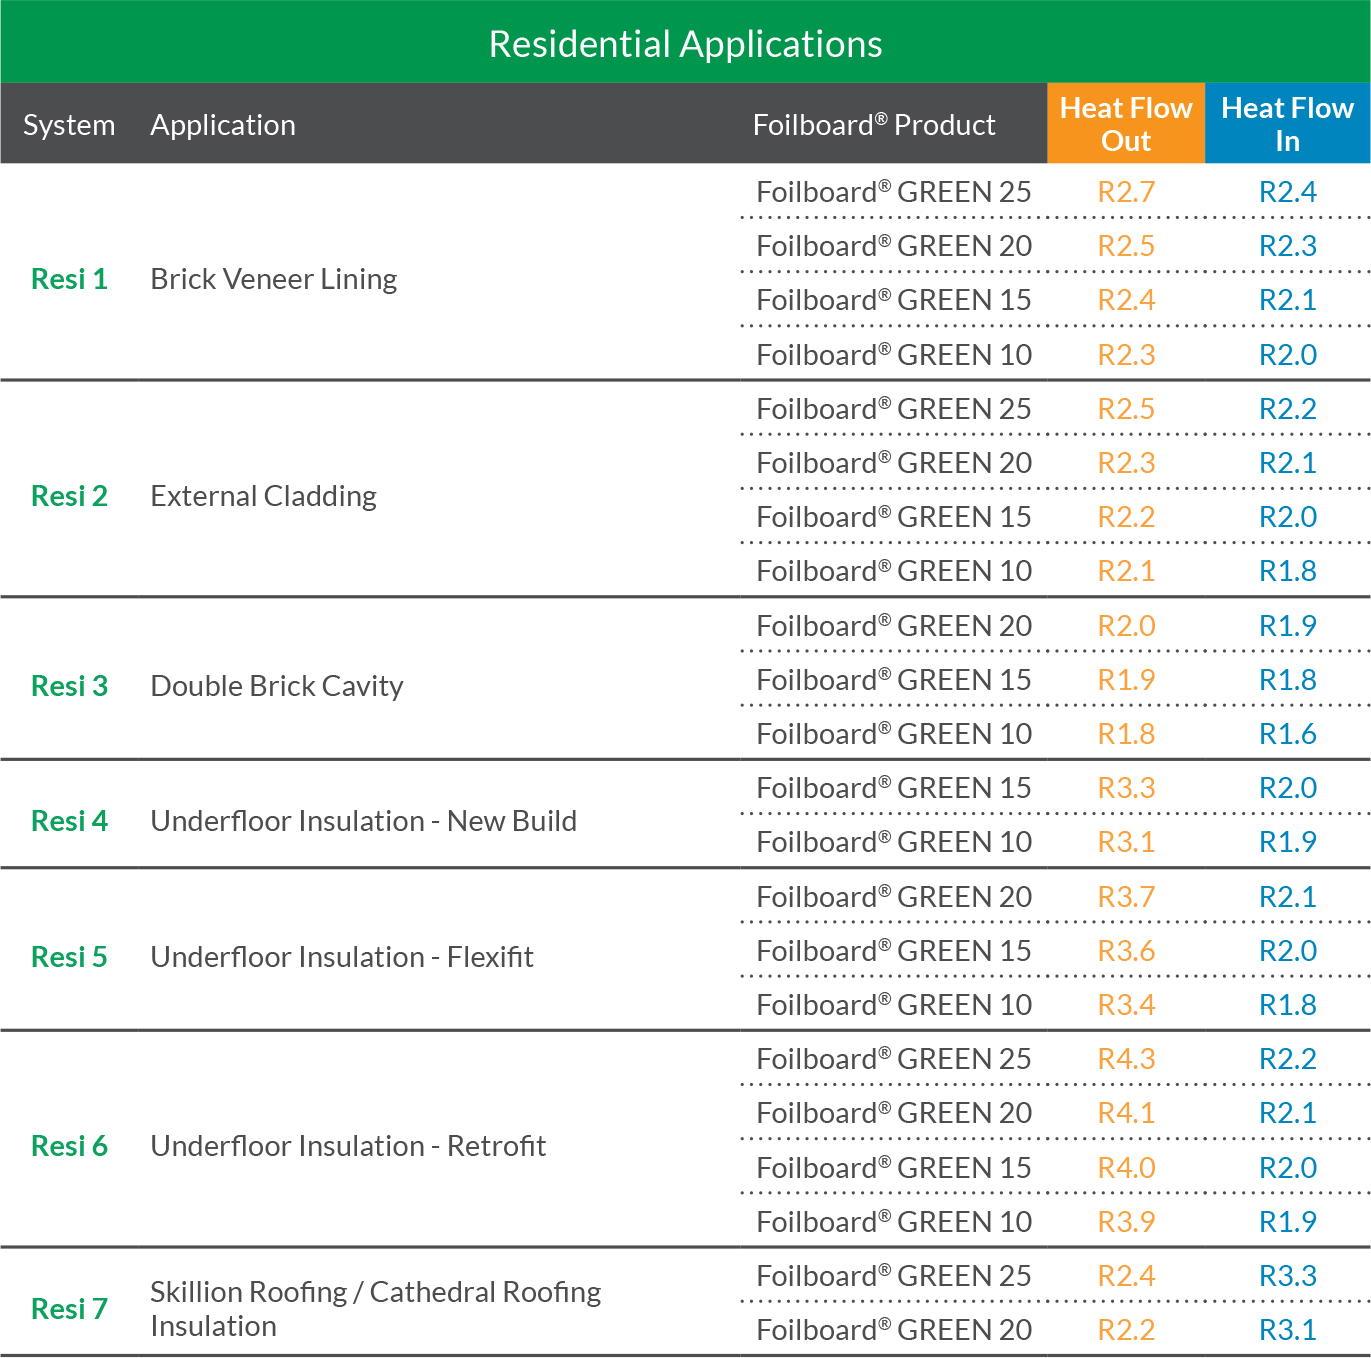 Foilboard R Values - Residential Applications